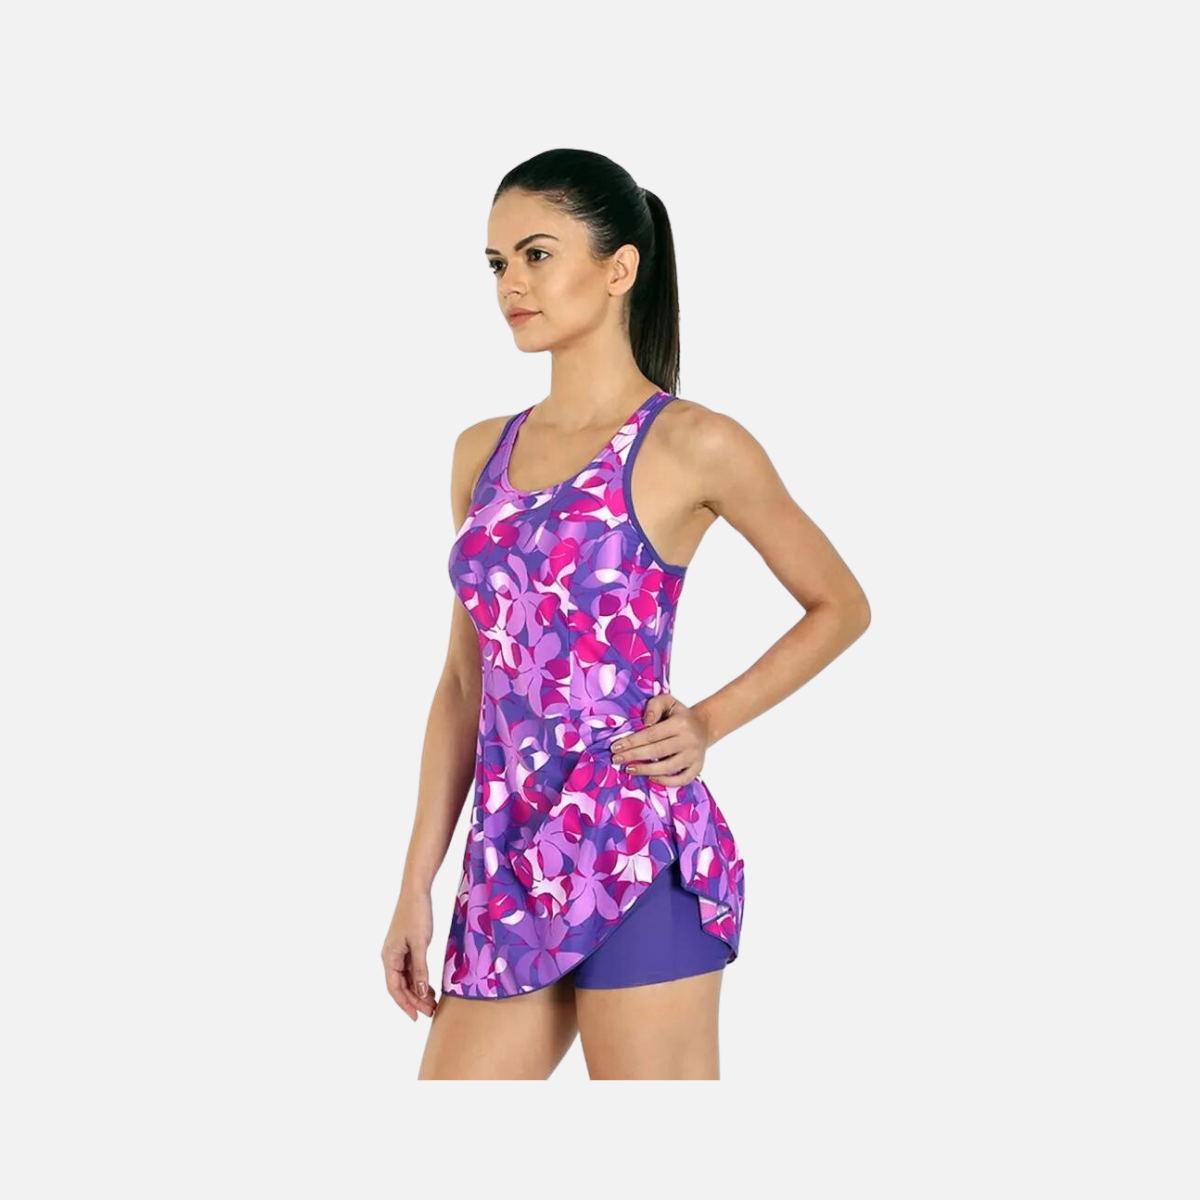 Speedo All Over Print Radial Radiance Women's Swimdress - Lava Red/Electric Pink/Tapestry